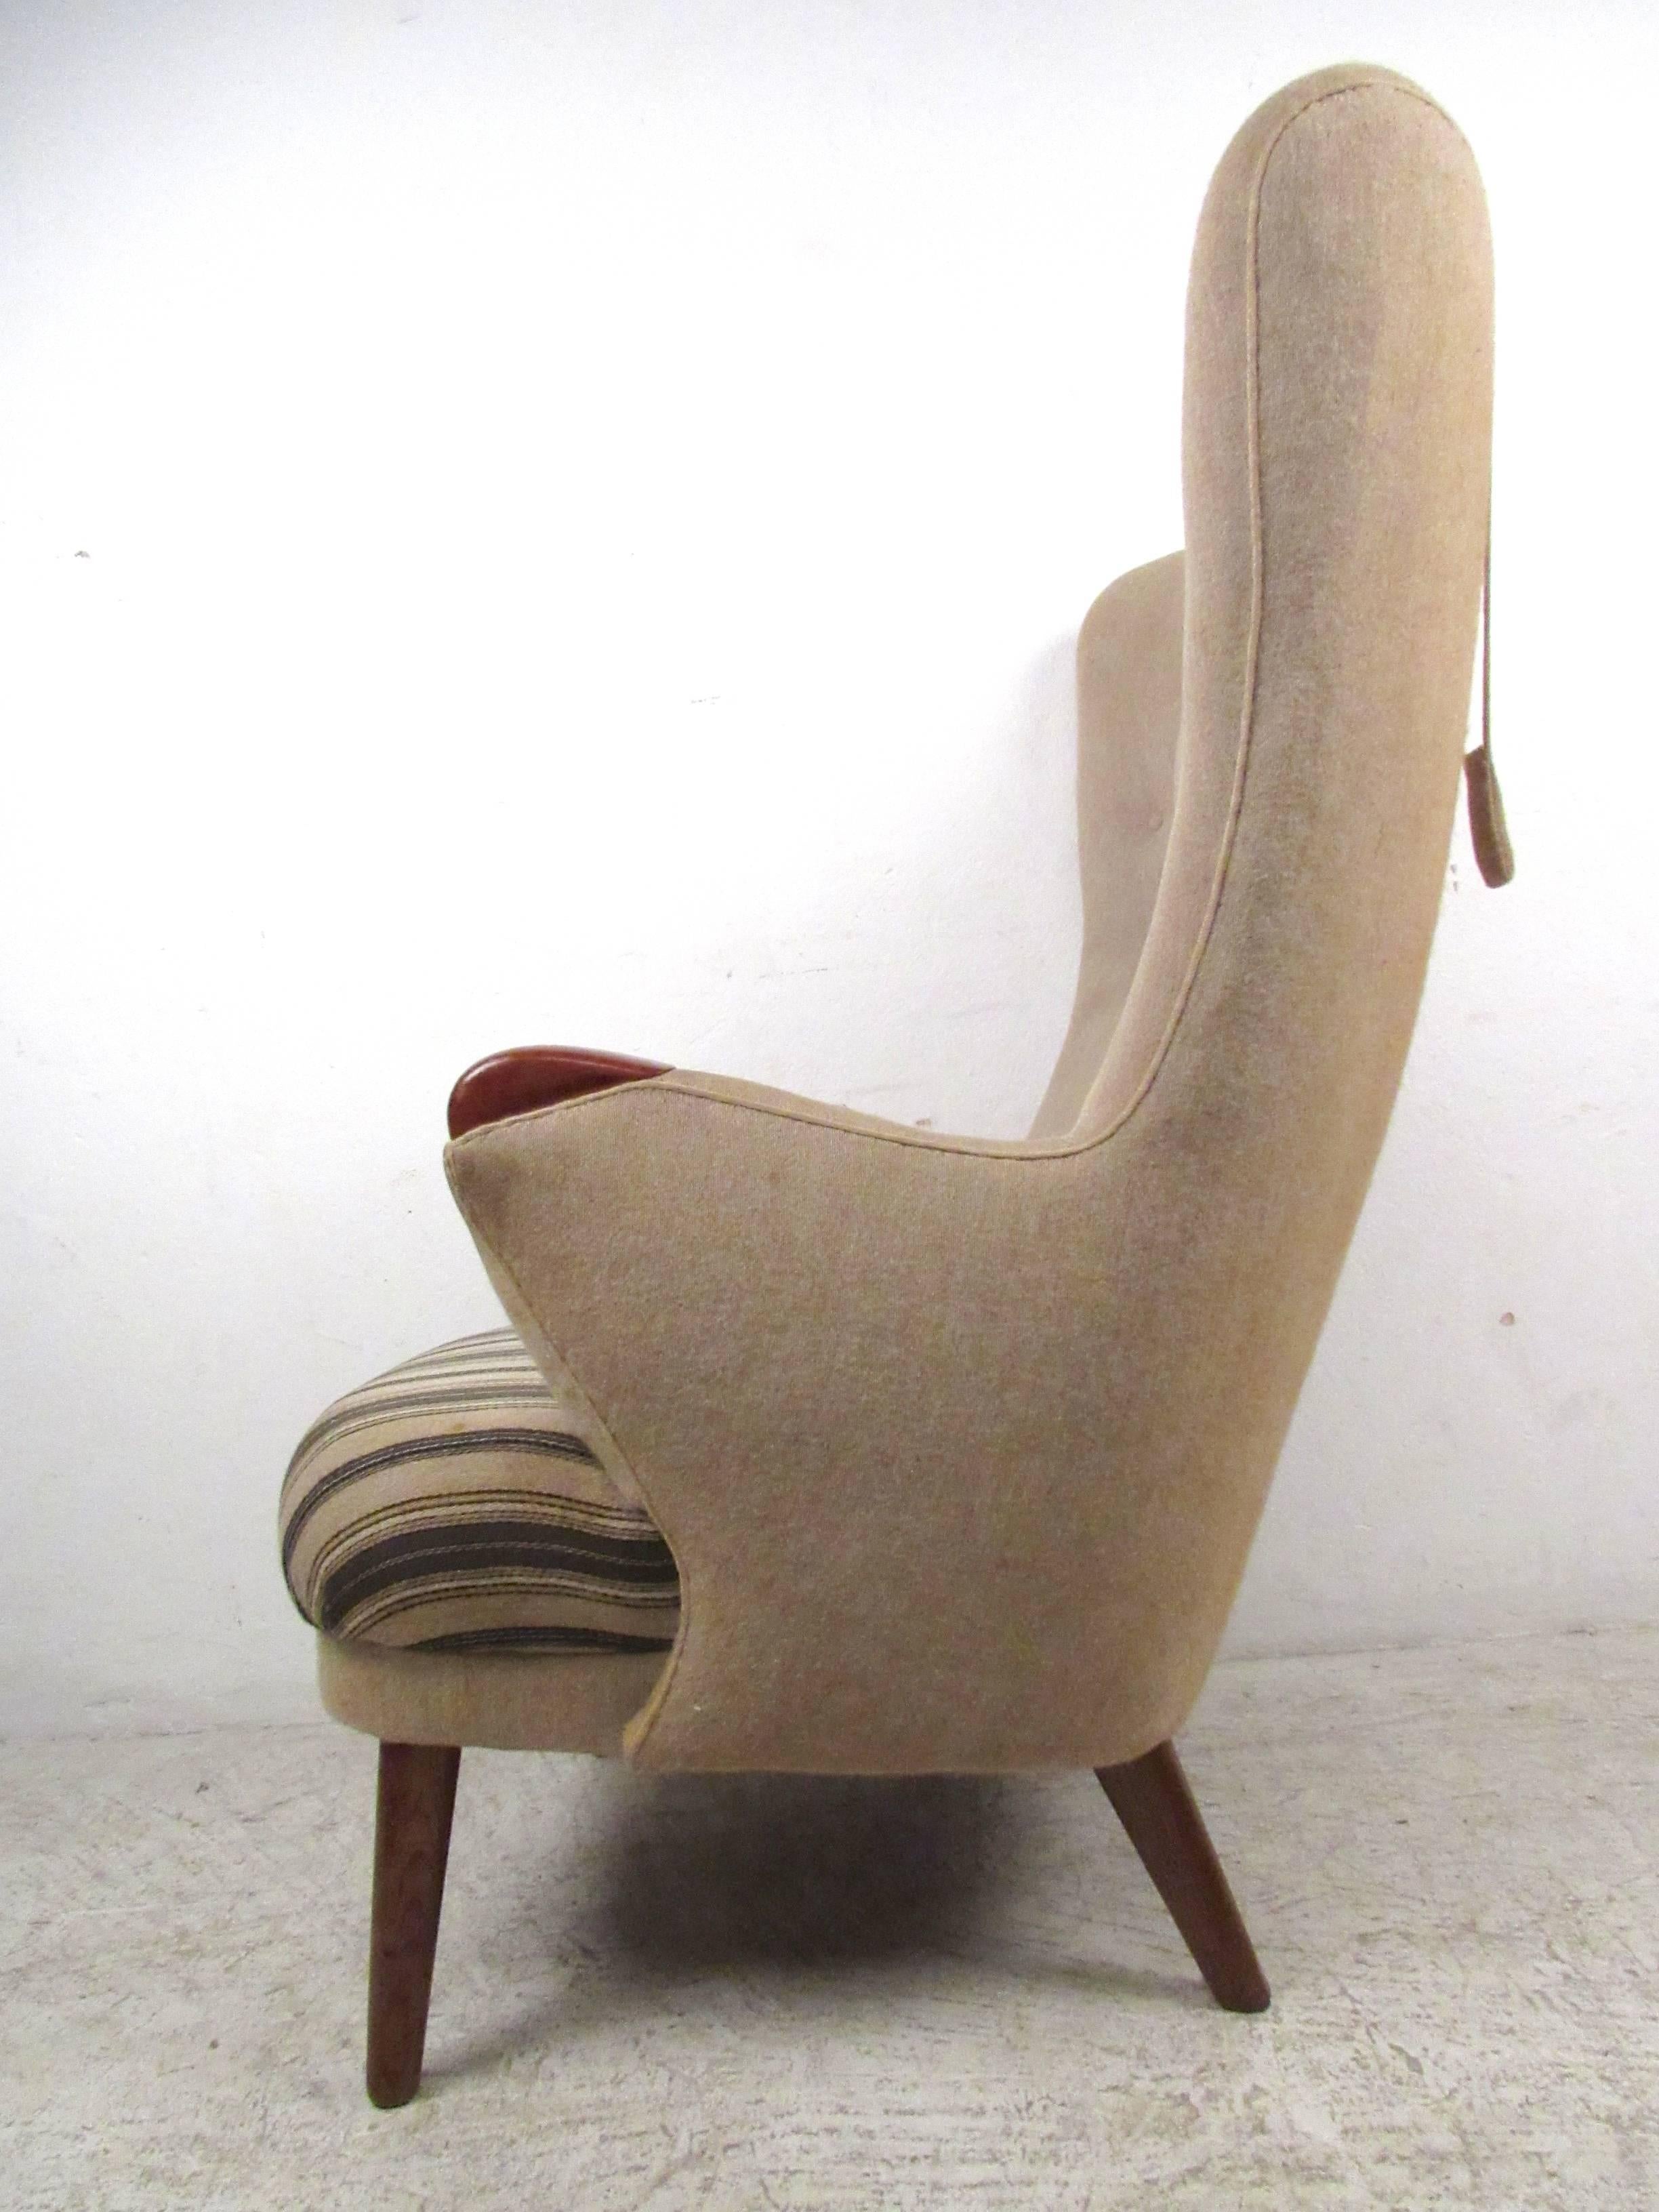 This unique vintage lounge chair features a unique tufted seat back, wooden armrests and tapered legs. The stylish shape of this mid-century chair is well accented with it's striped seat upholstery. Please confirm item location (NY or NJ).